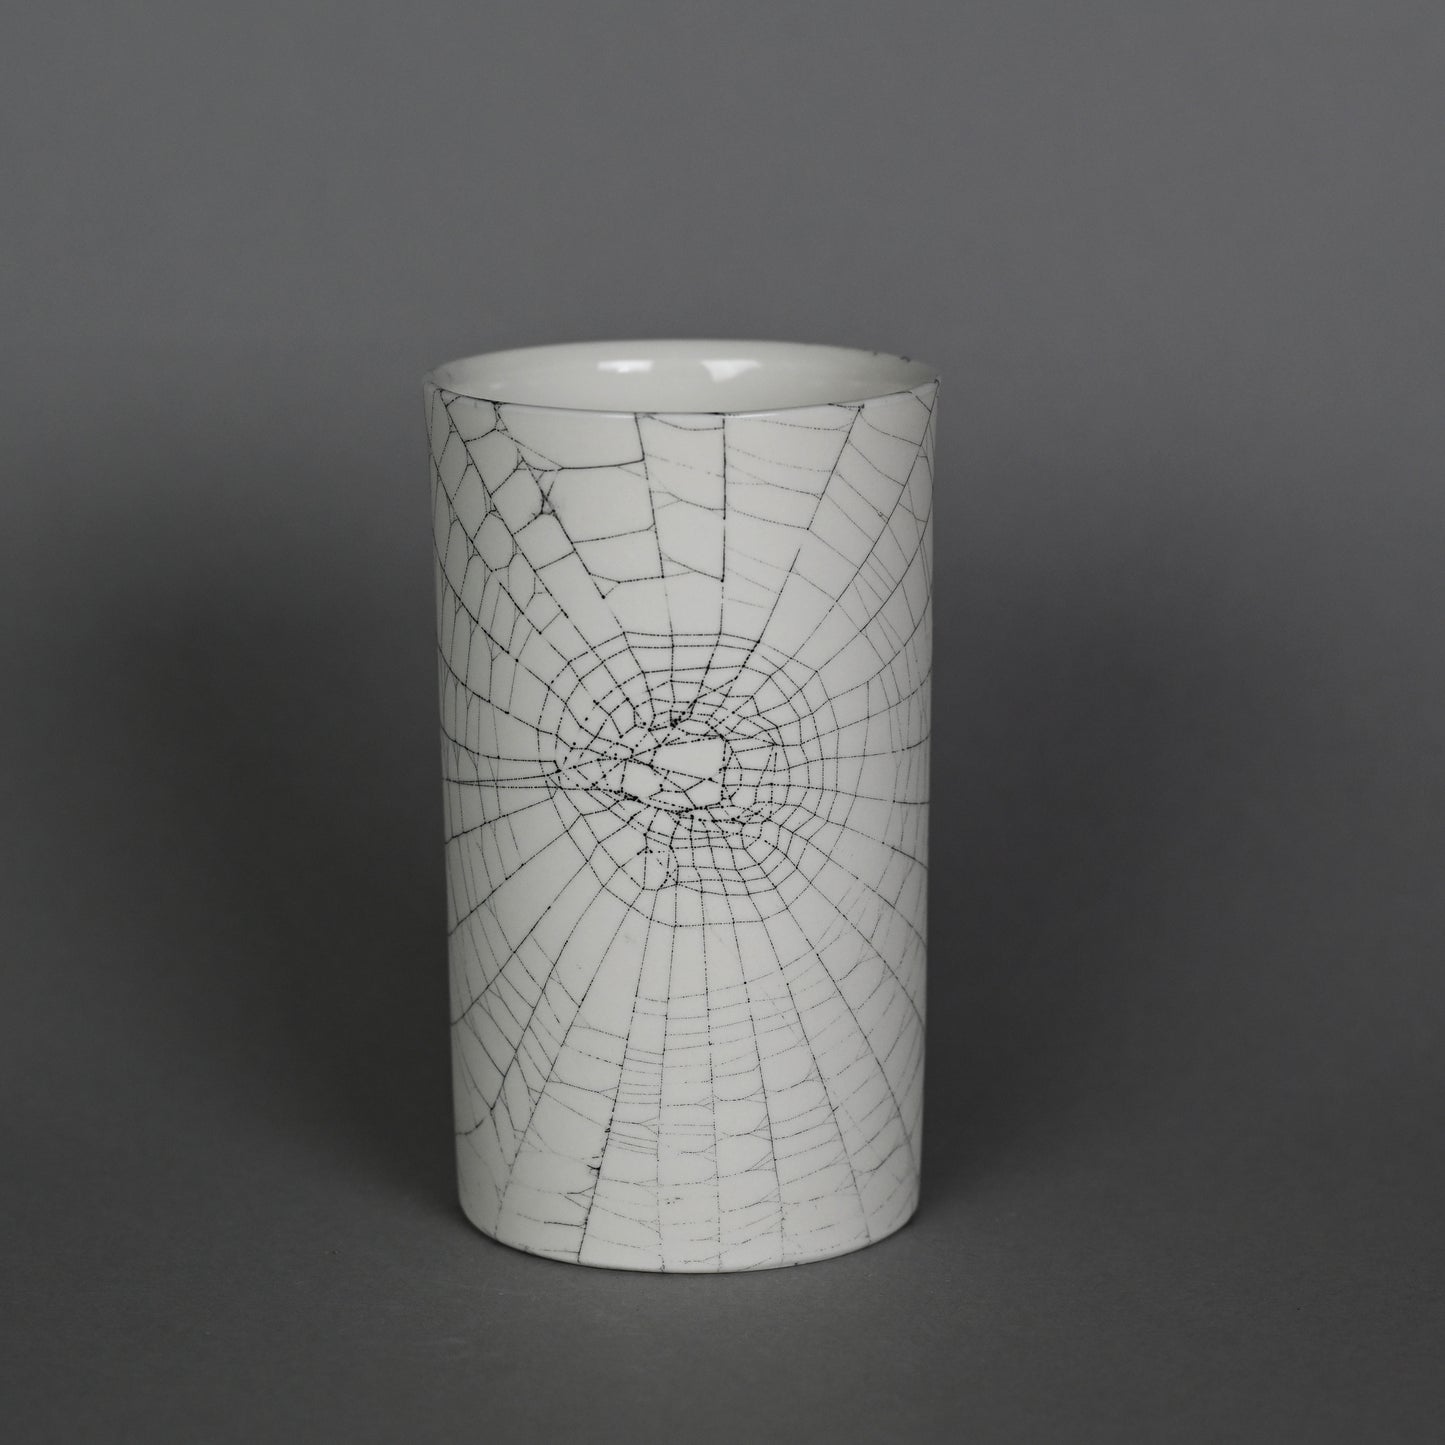 Web on Clay (207), Collected September 25, 2022